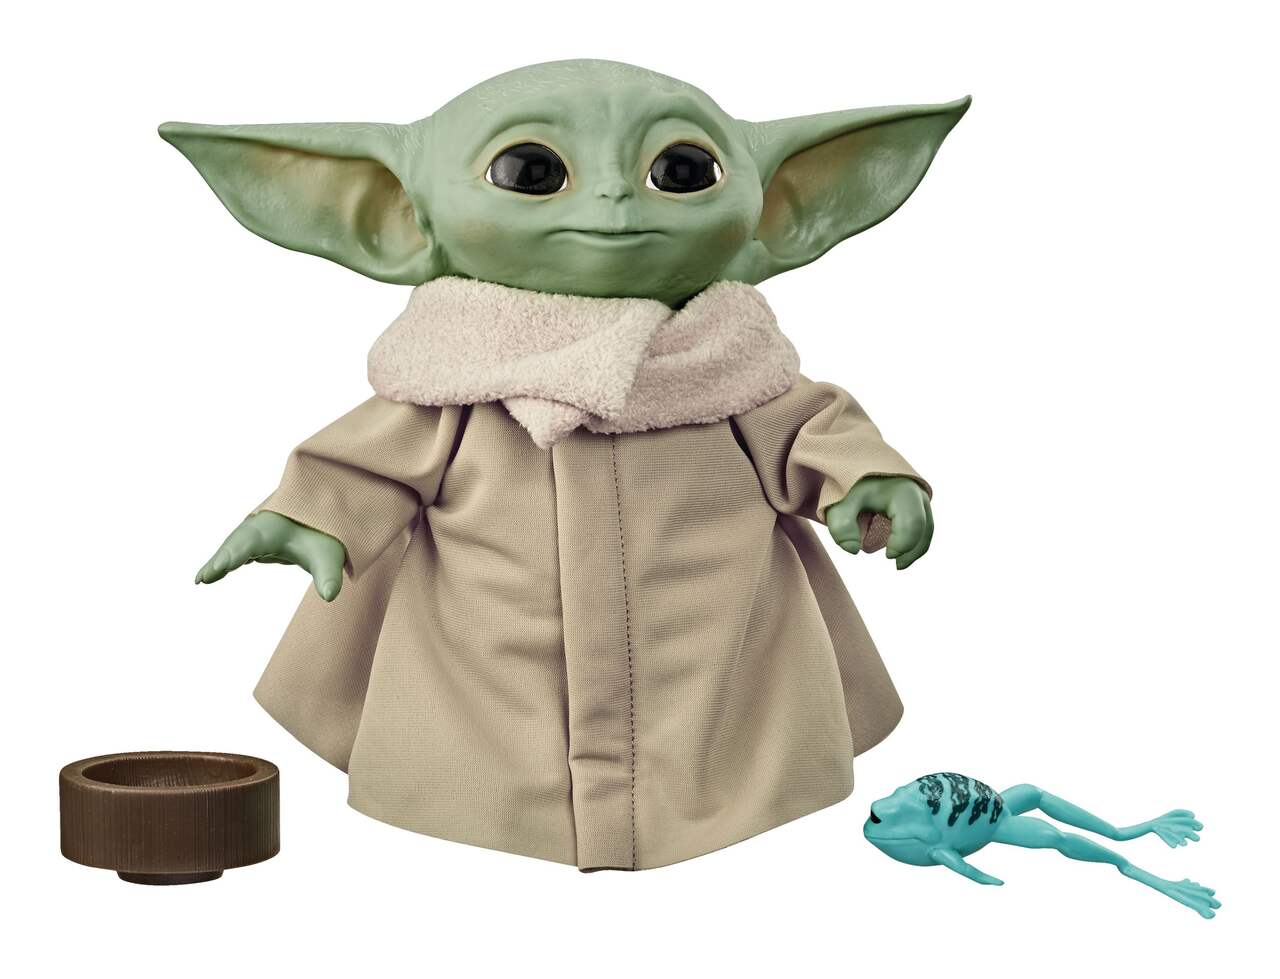 https://media-www.canadiantire.ca/product/seasonal-gardening/toys/toys-games/0508064/-star-wars-the-child-talking-plush-toy-92643945-4d61-4ab9-8471-acb971a834ad-jpgrendition.jpg?imdensity=1&imwidth=1244&impolicy=mZoom